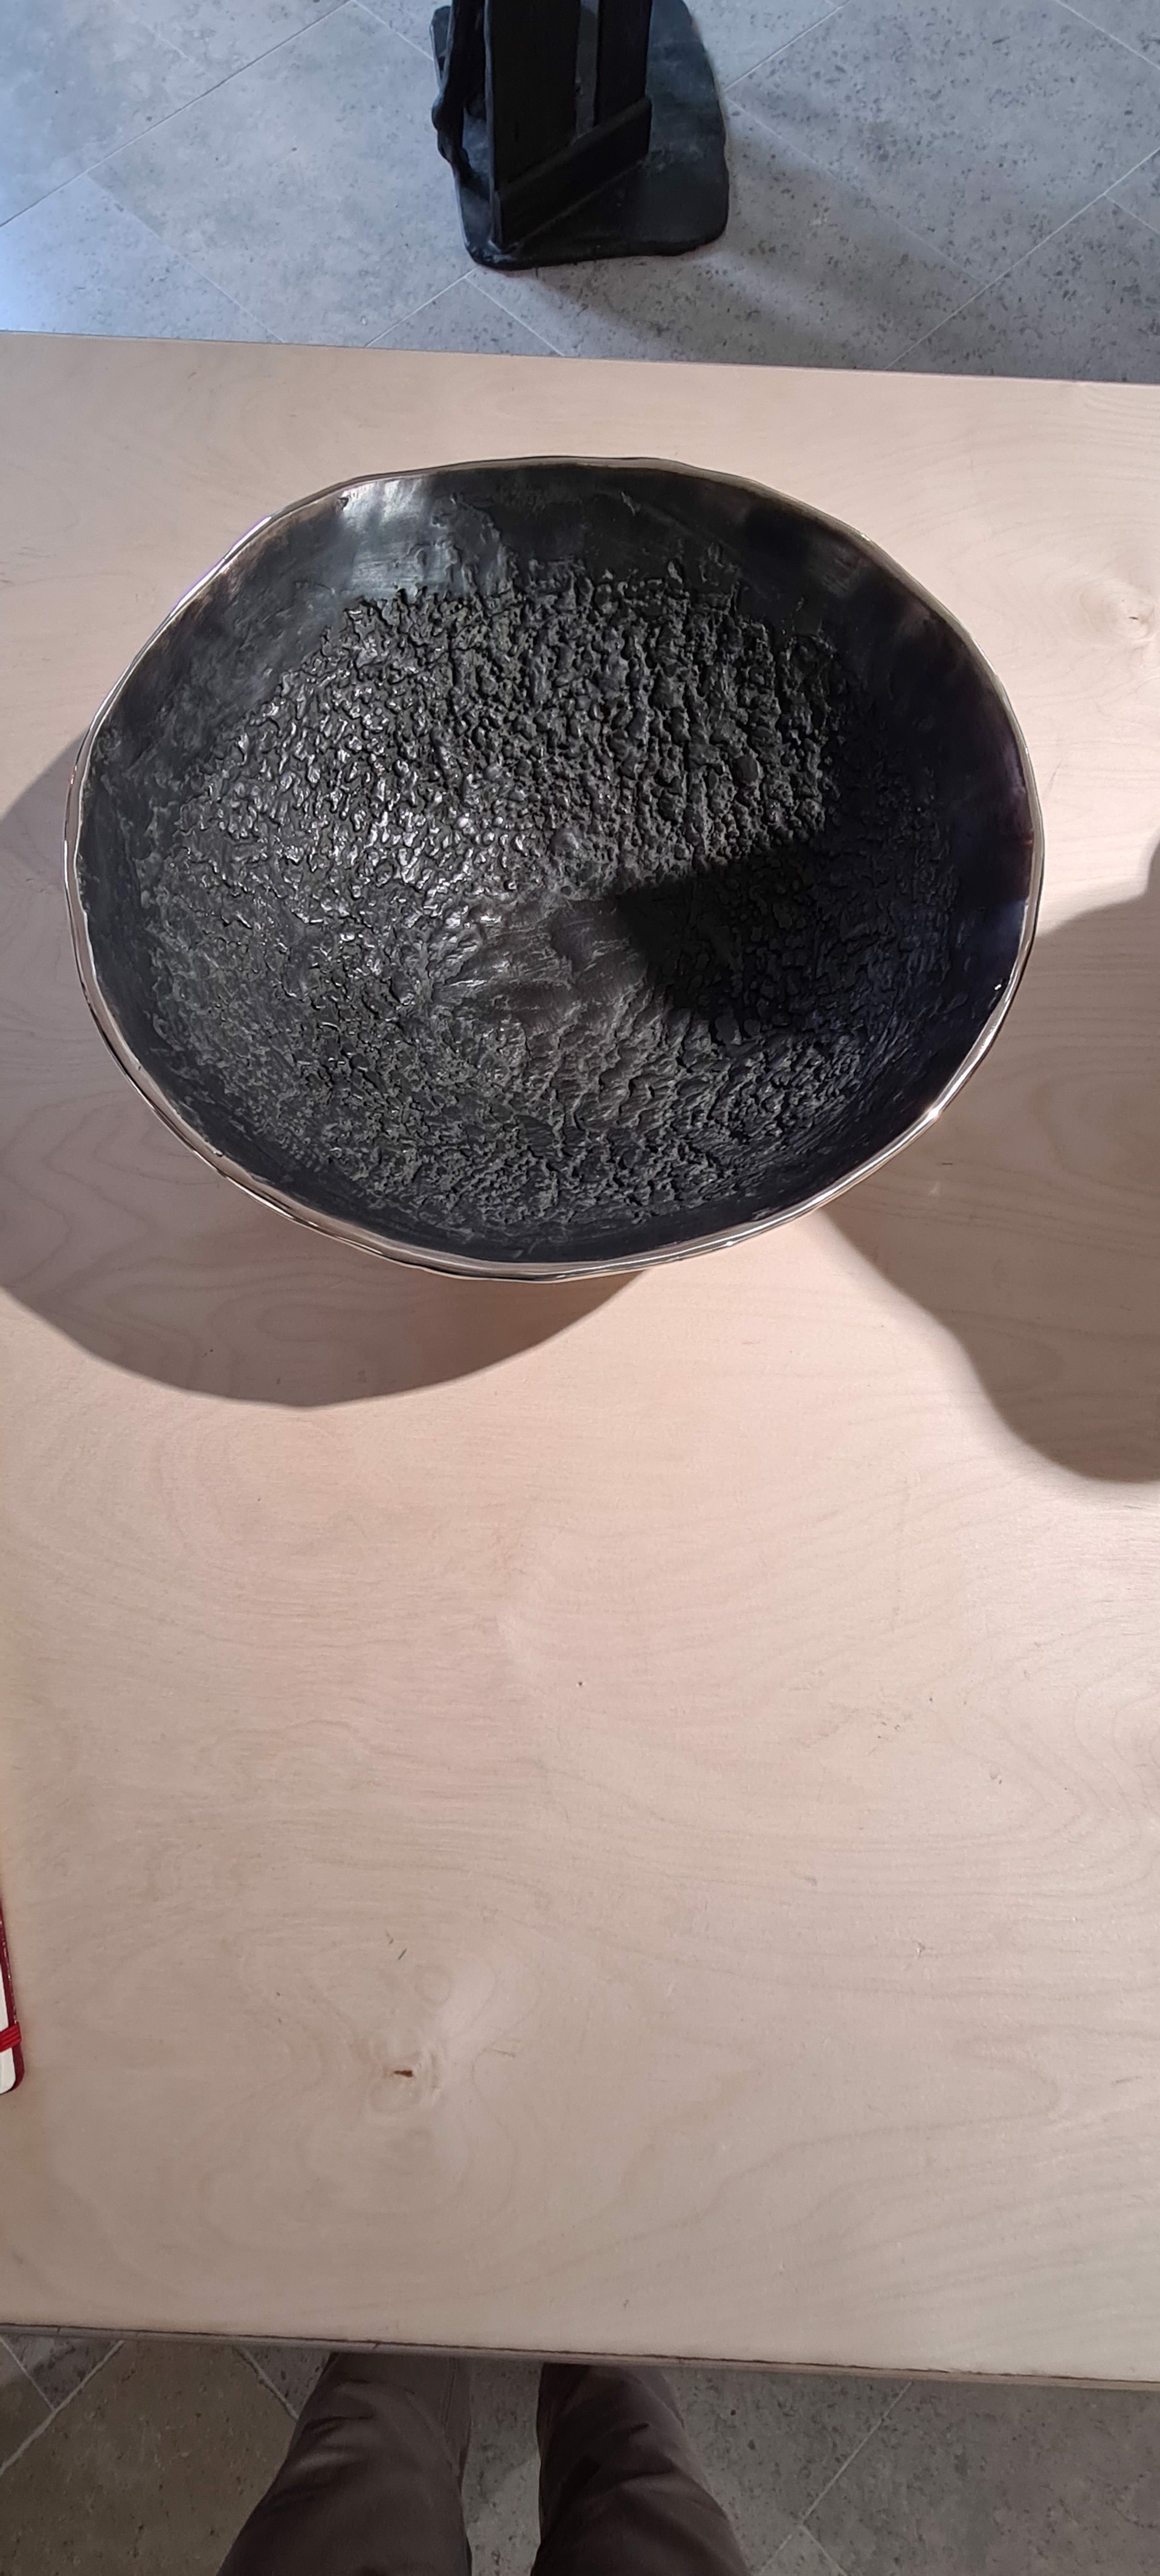 Open Form Bowl  by Jack Eagan